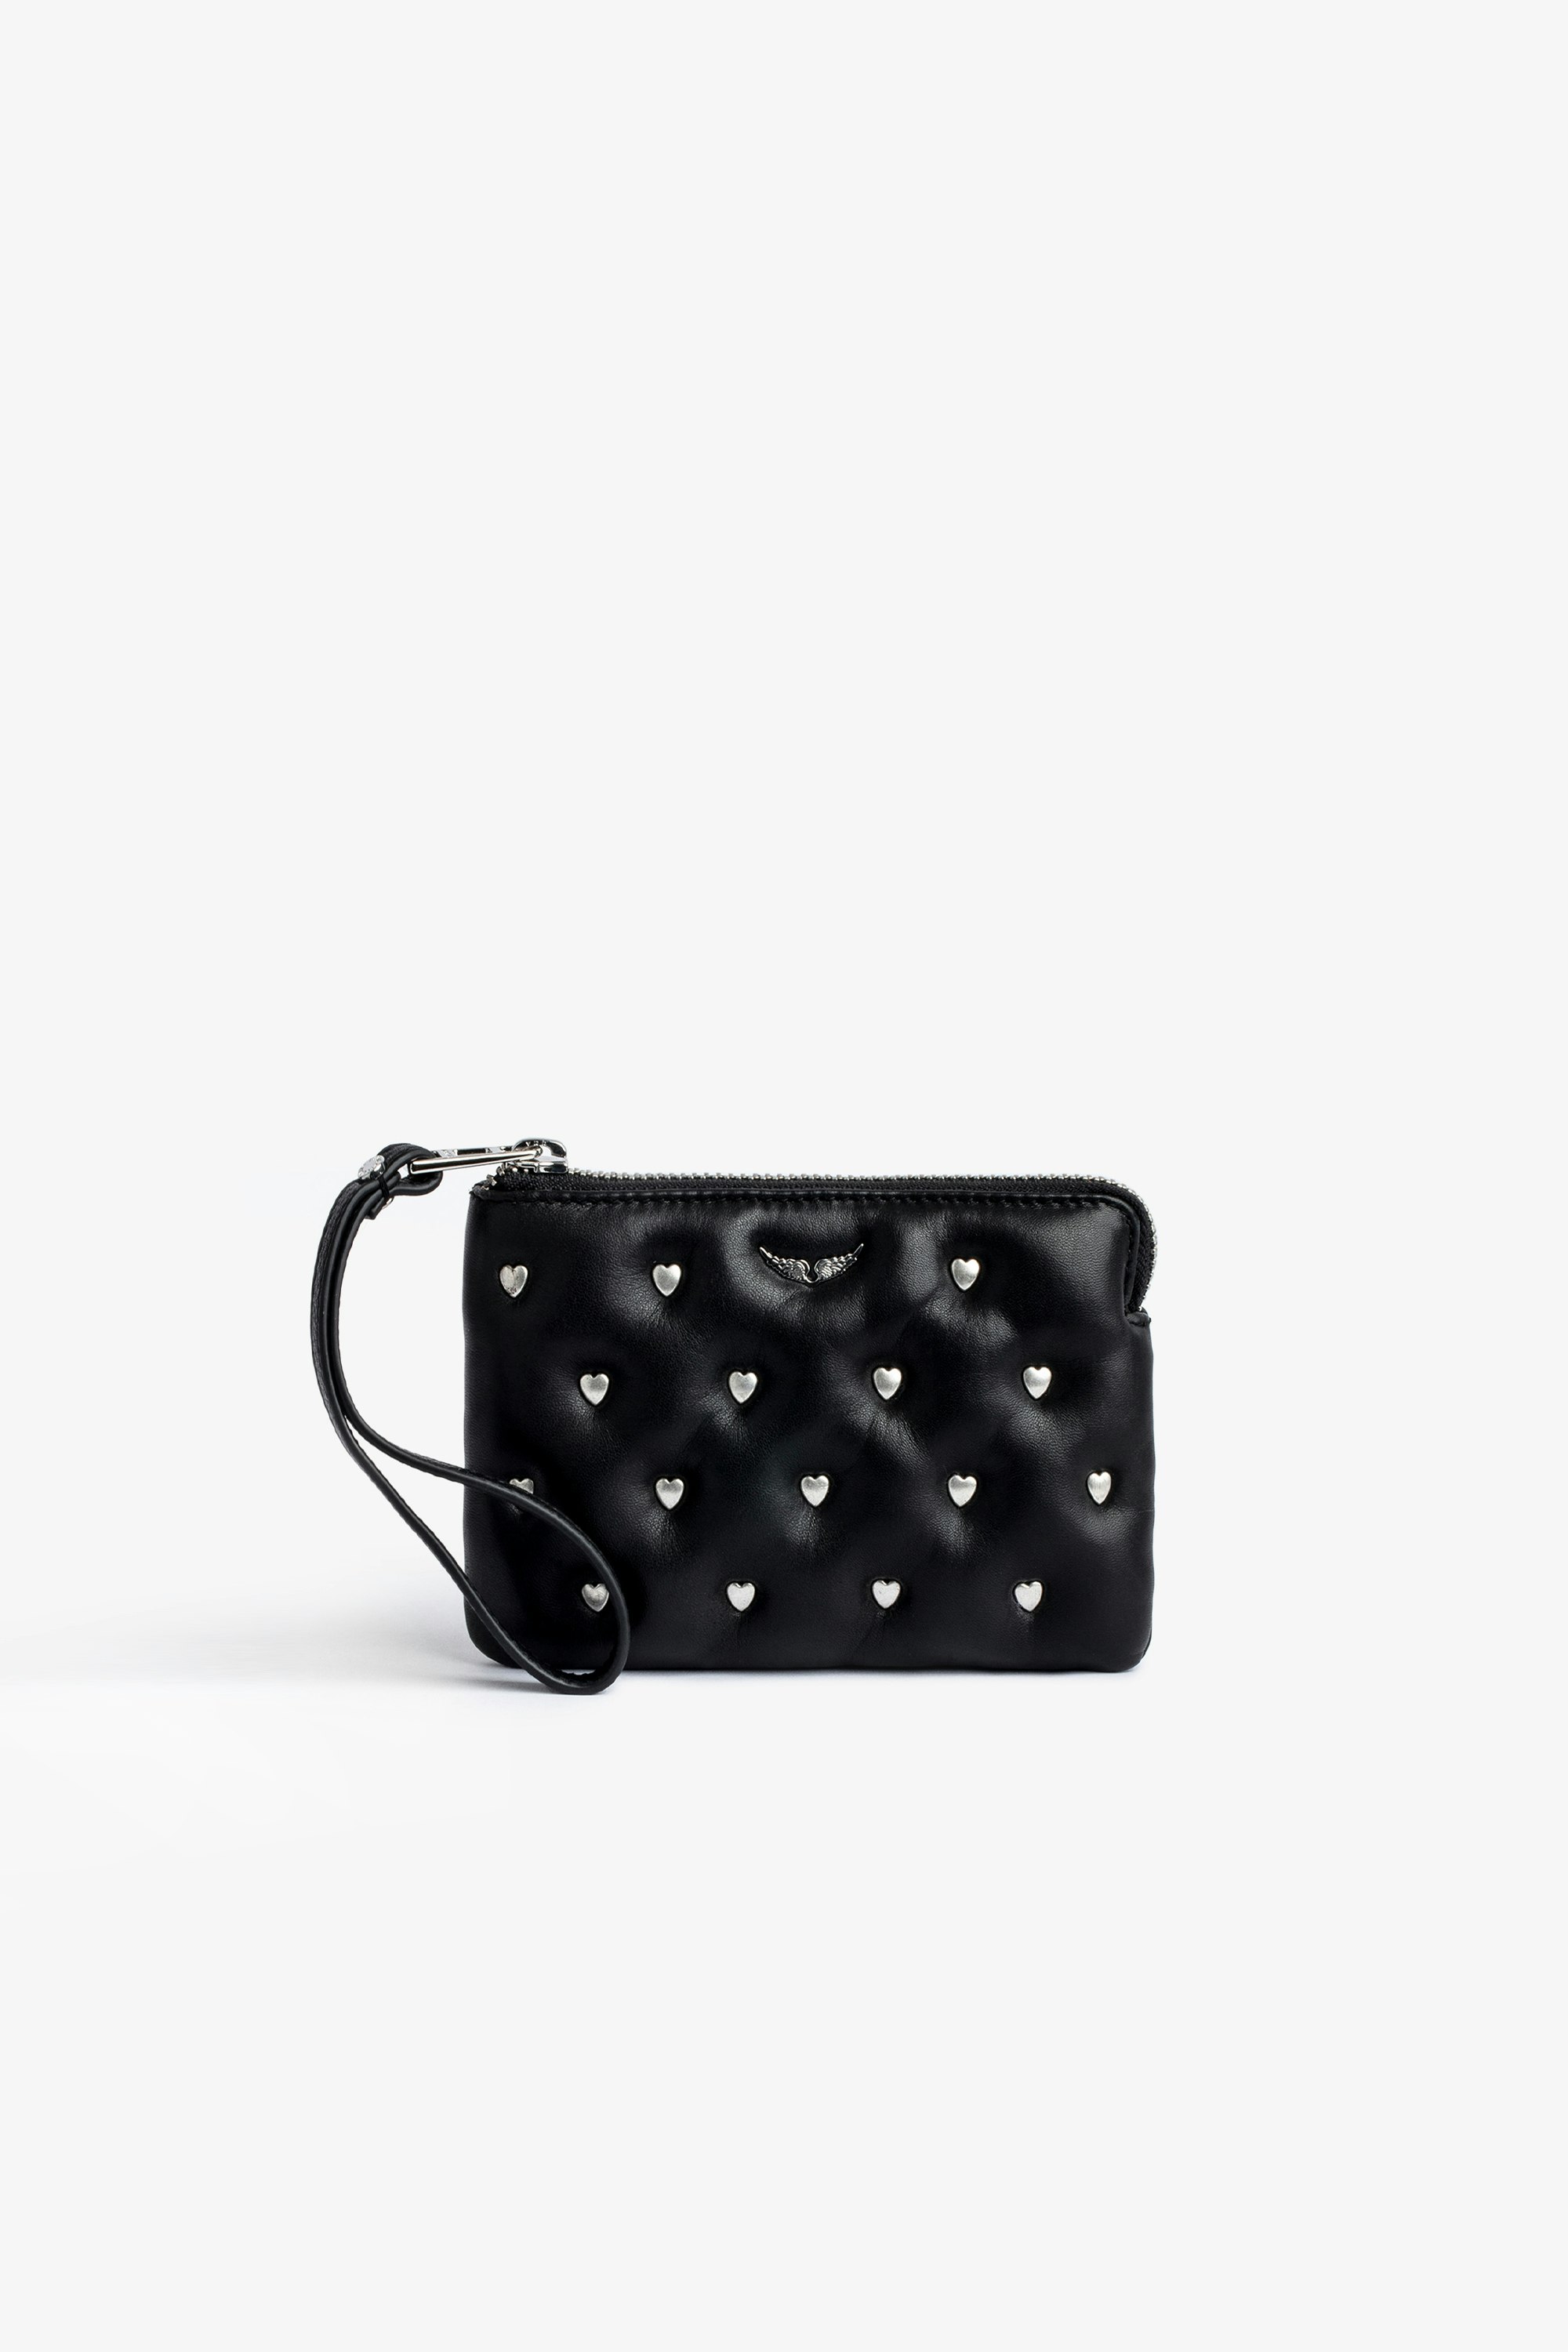 Mini Uma クラッチバッグ Women’s small clutch in black smooth leather with heart studs